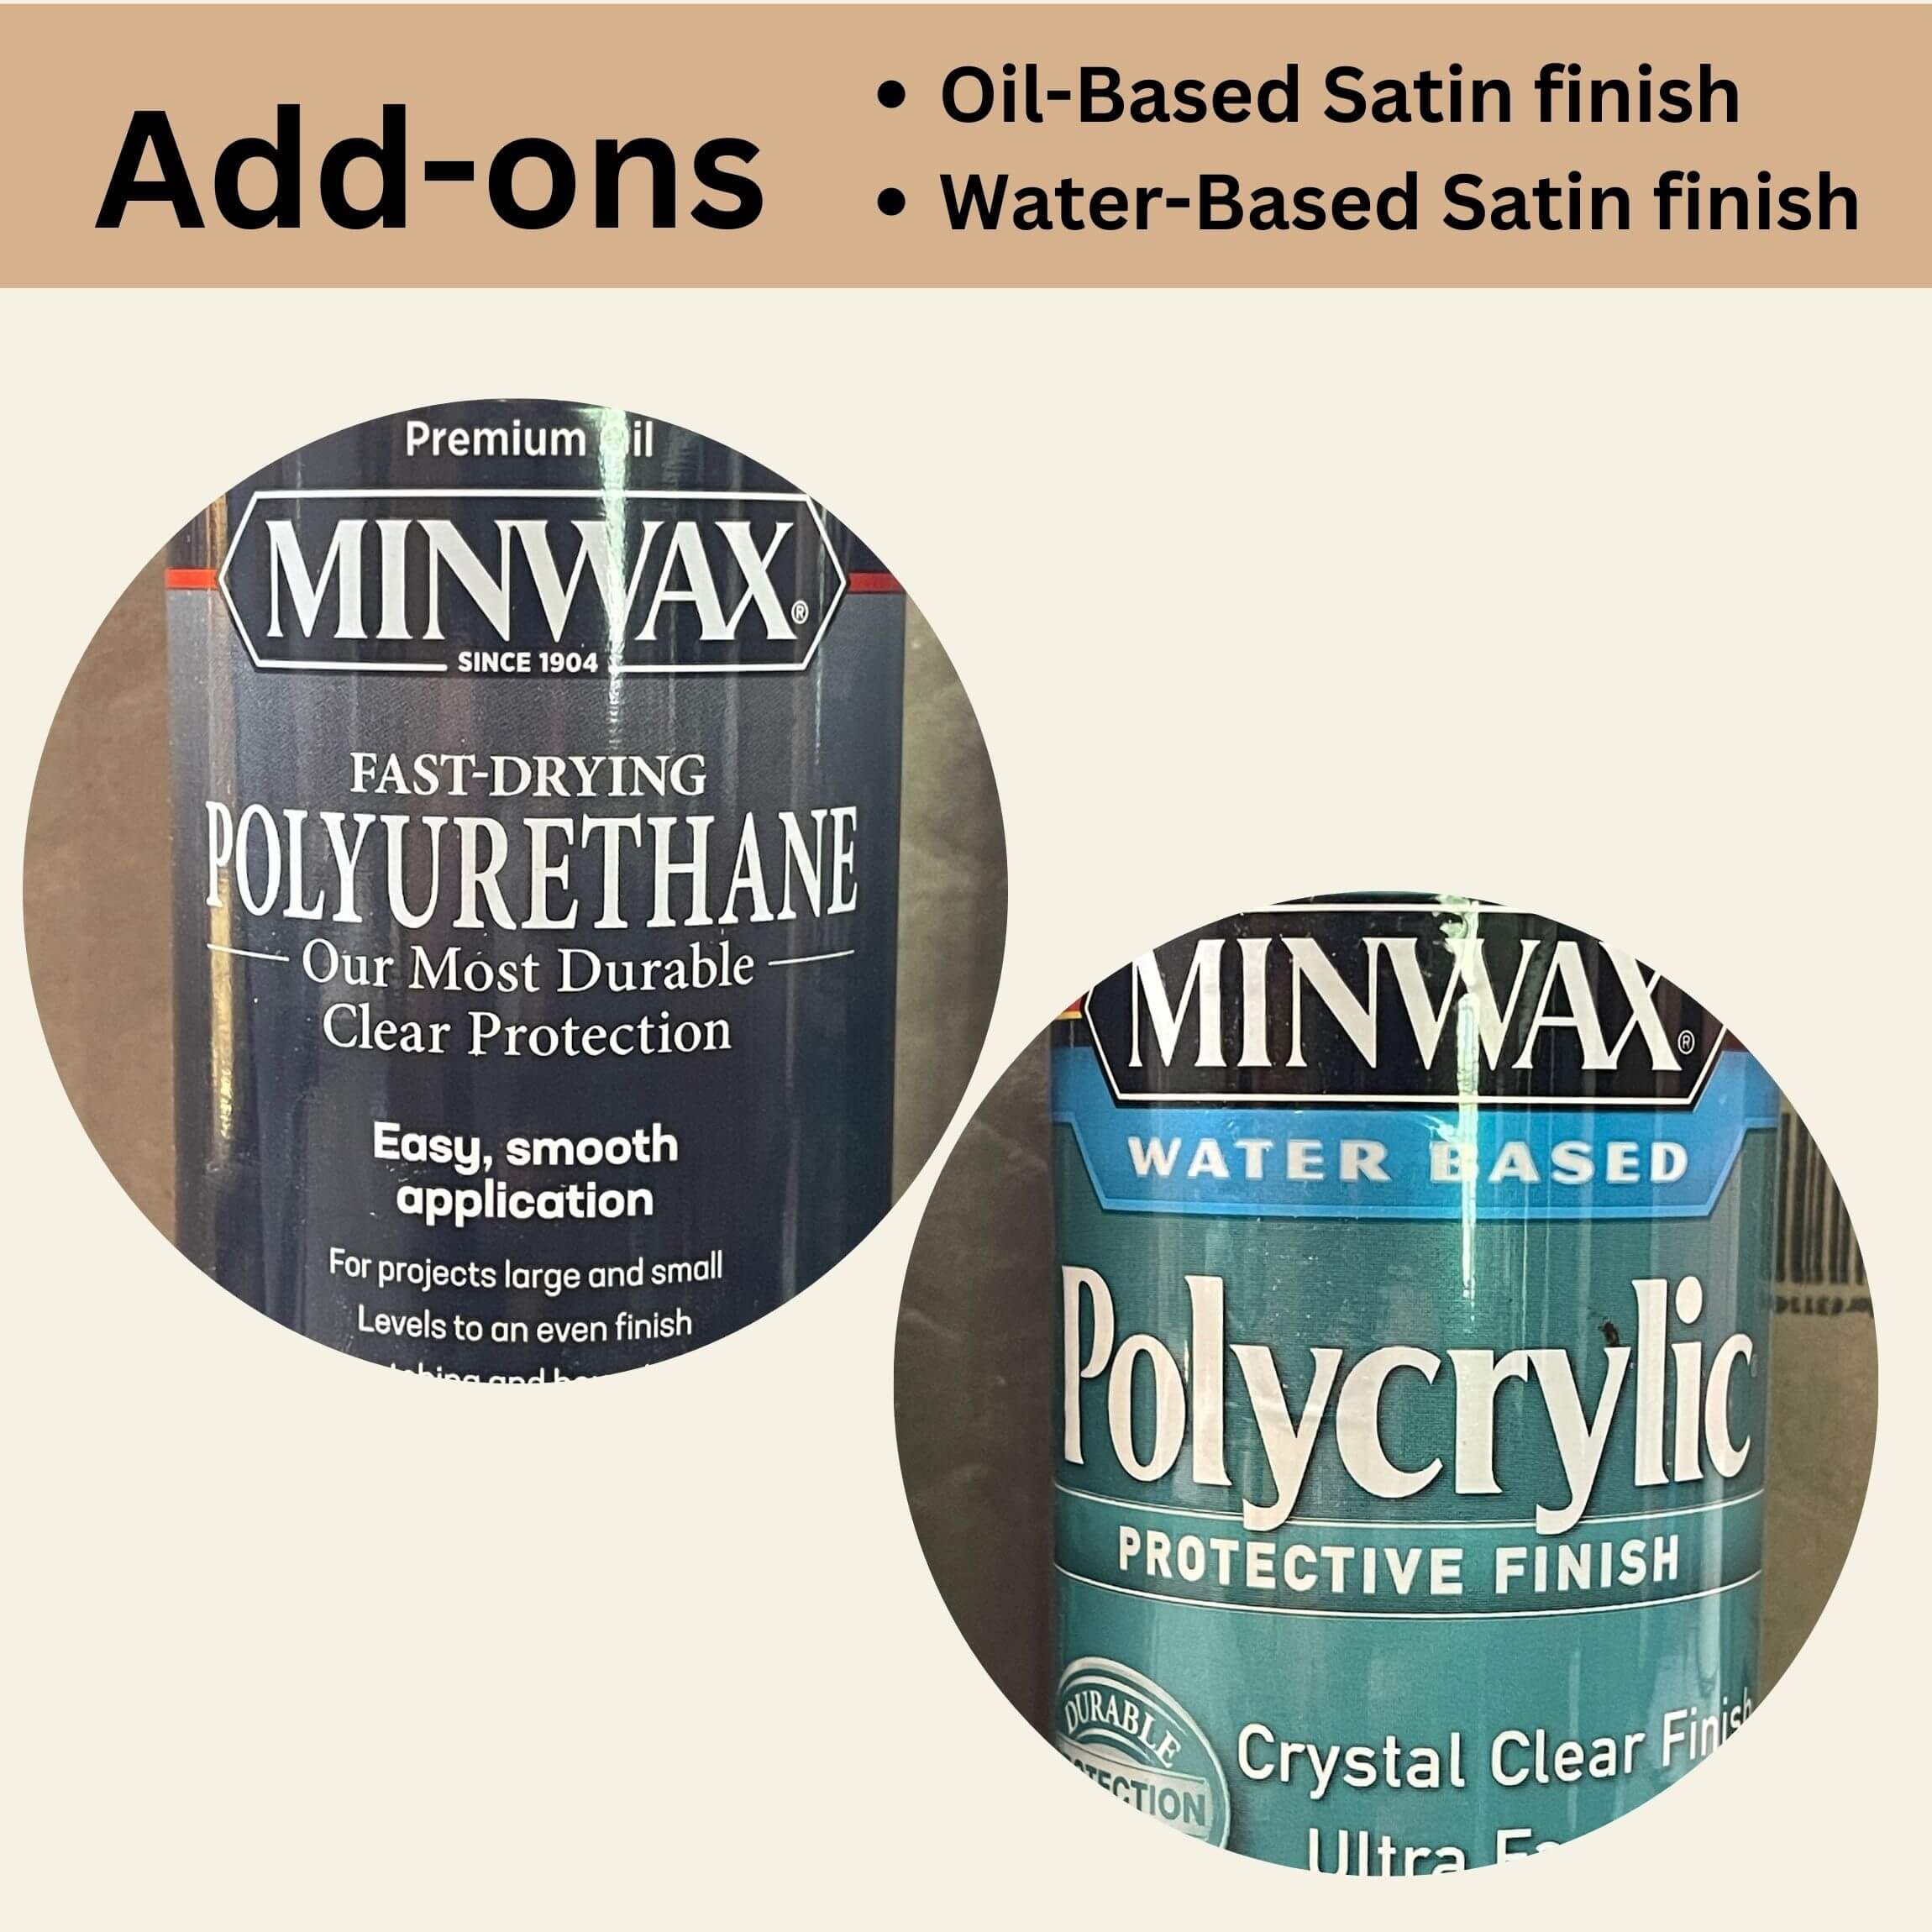 Choose from either a minwax polyurethane finish or a minwax polycrylic finish in addition to the standard no finish option. 